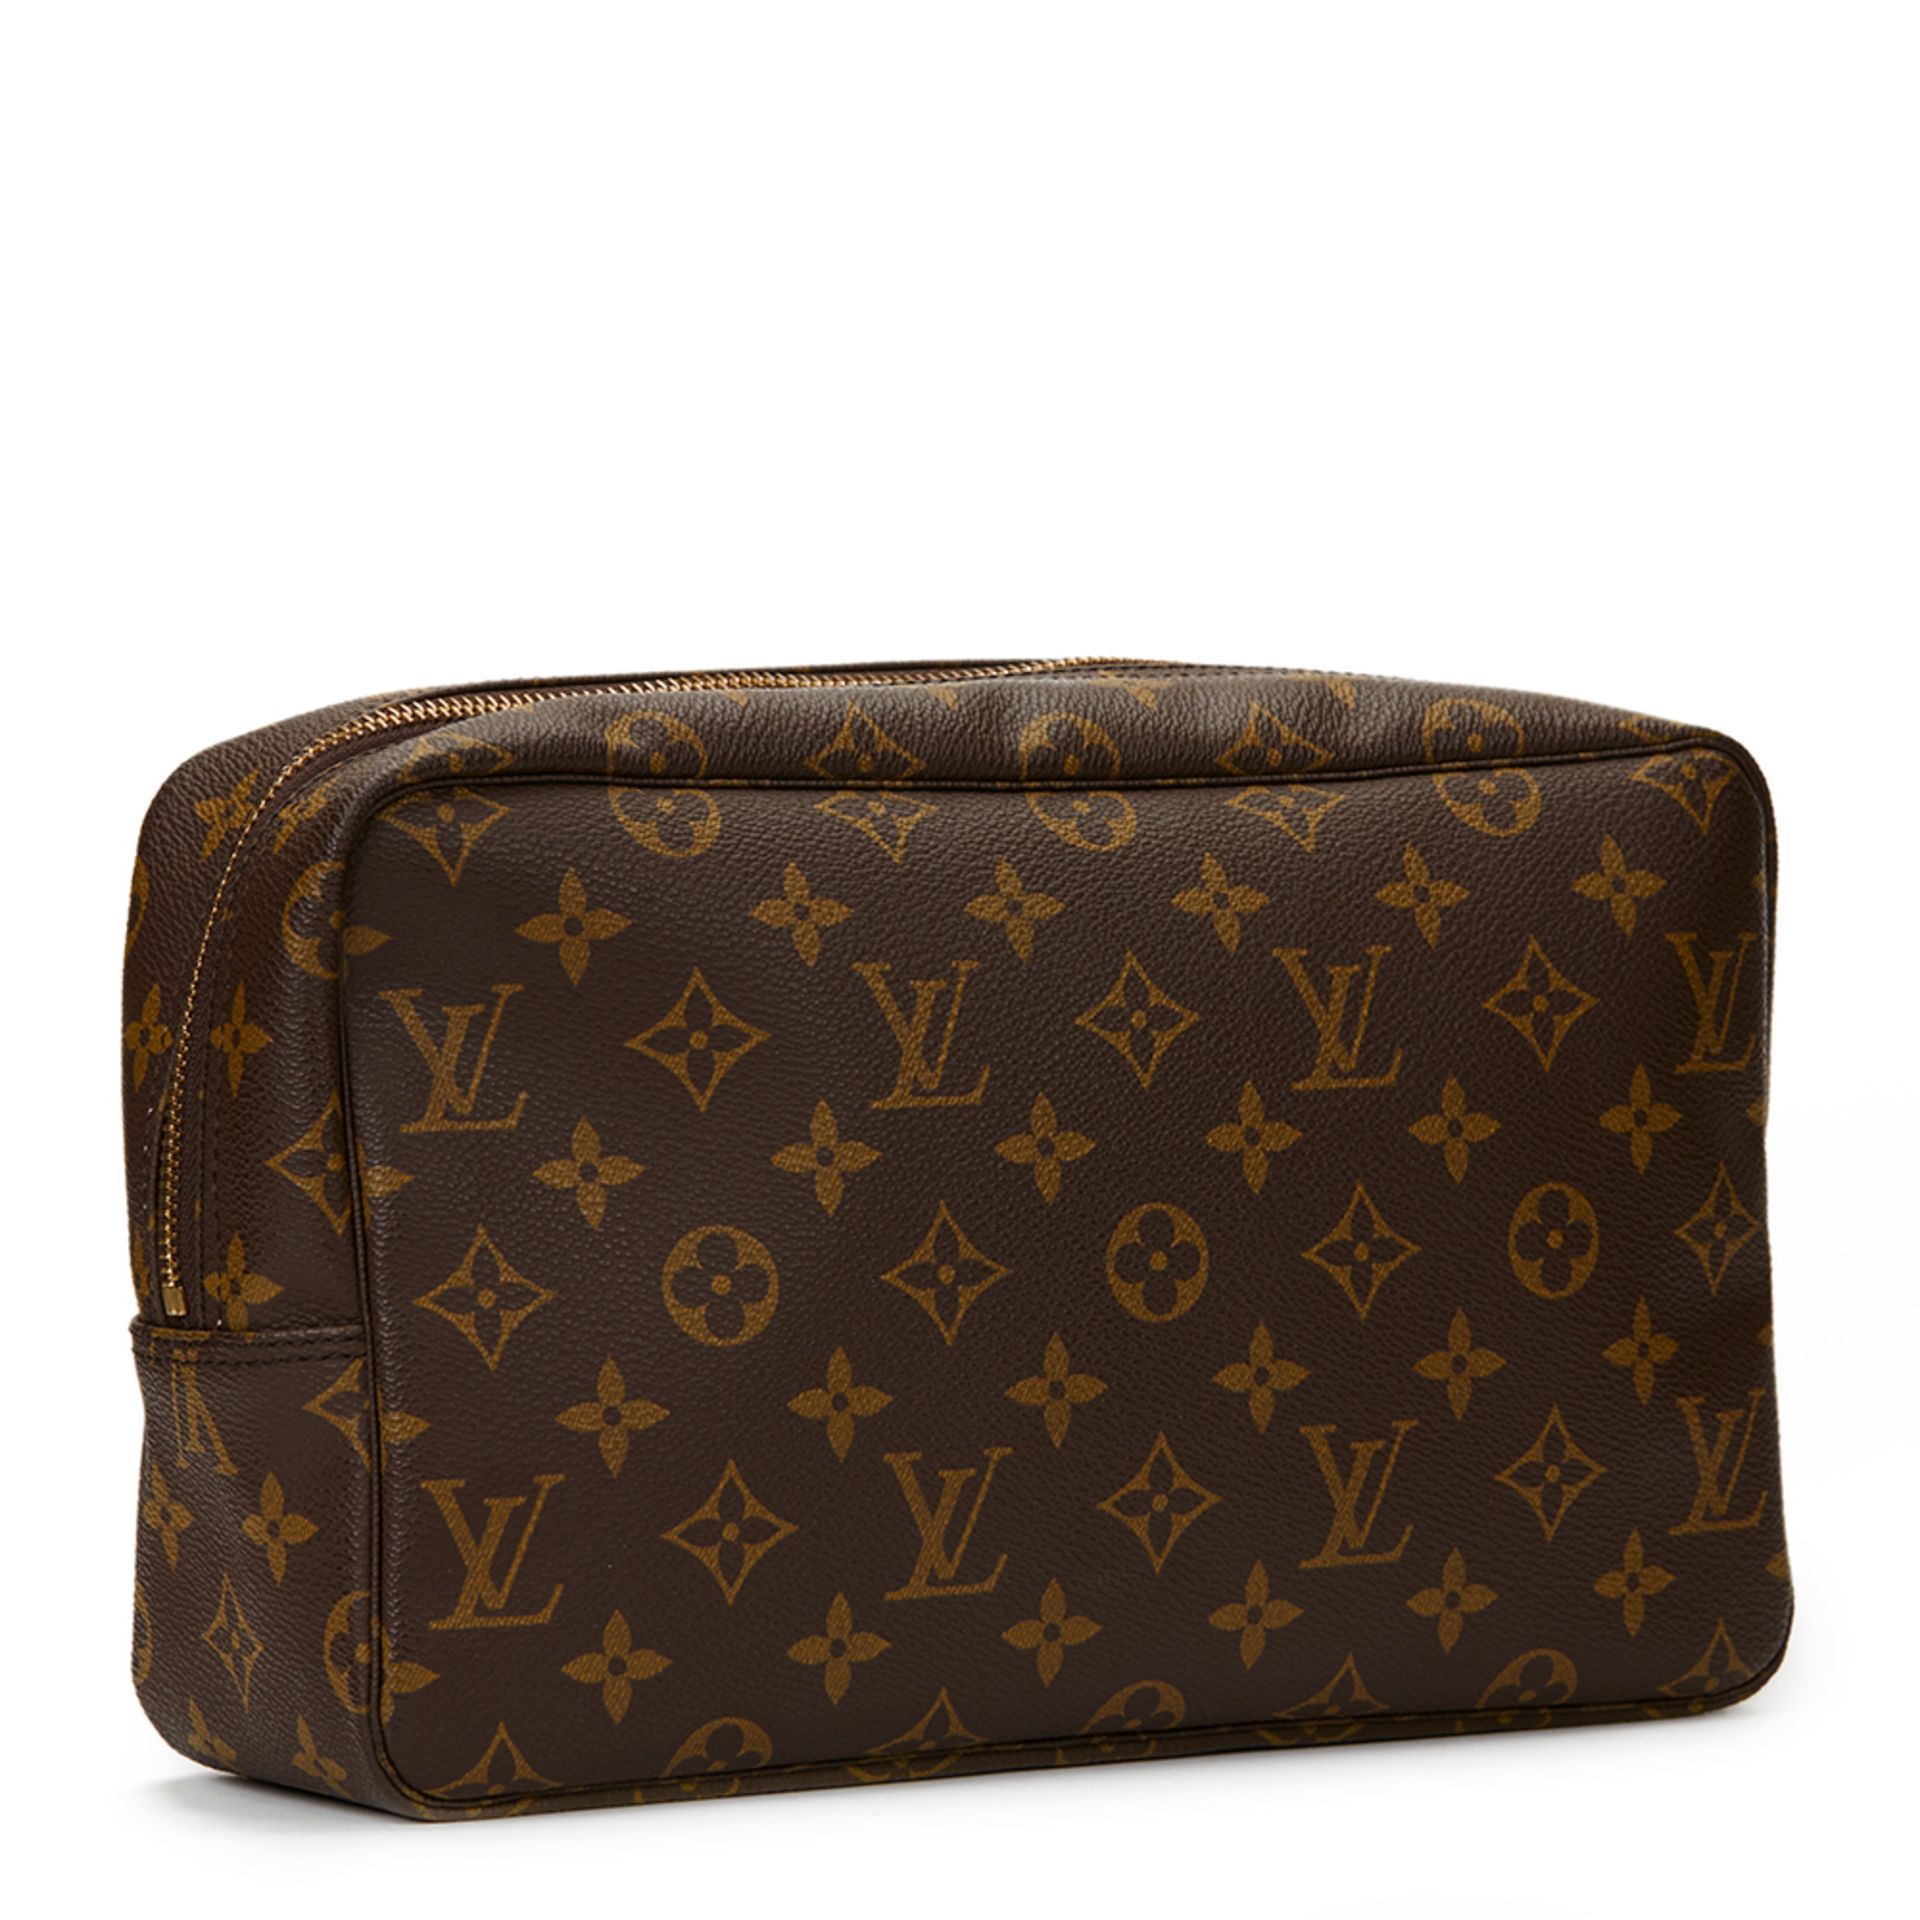 HB1180 Louis Vuitton Hand-painted 'Ca$h Me Outside' X Year Zero London Toiletry Pouch - Image 4 of 9